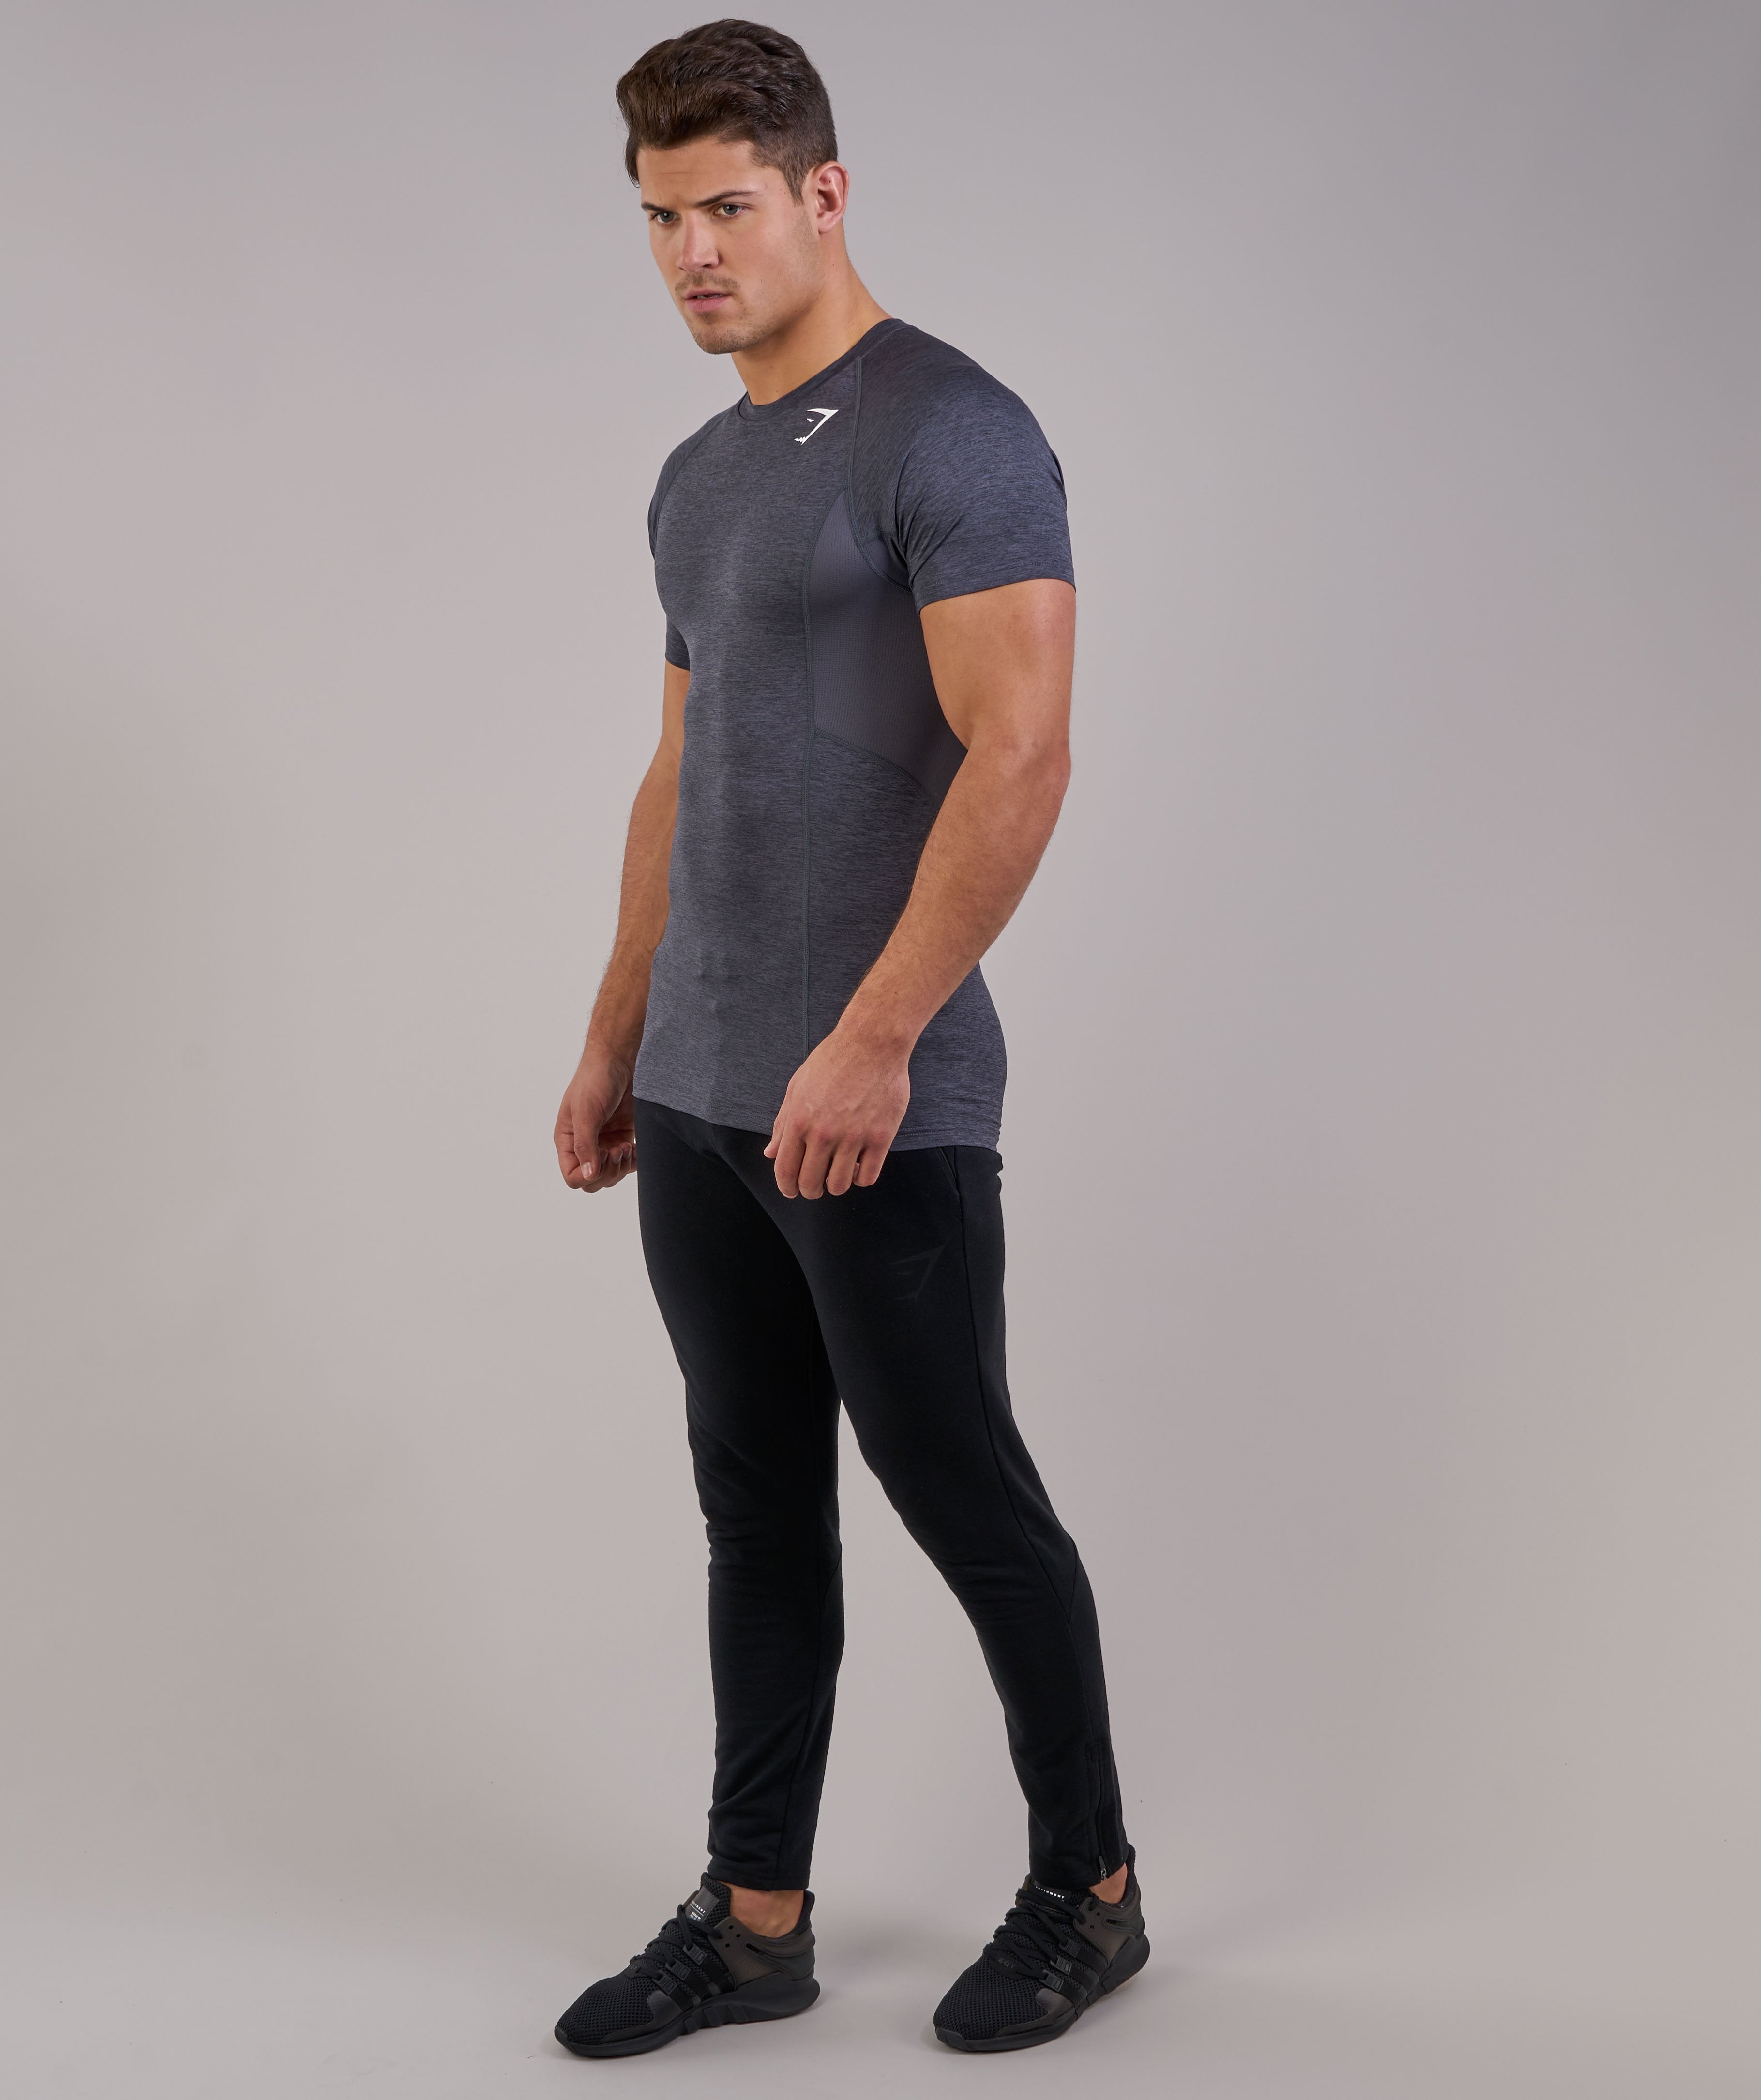 Element Baselayer Short Sleeve Top in Charcoal Marl - view 3